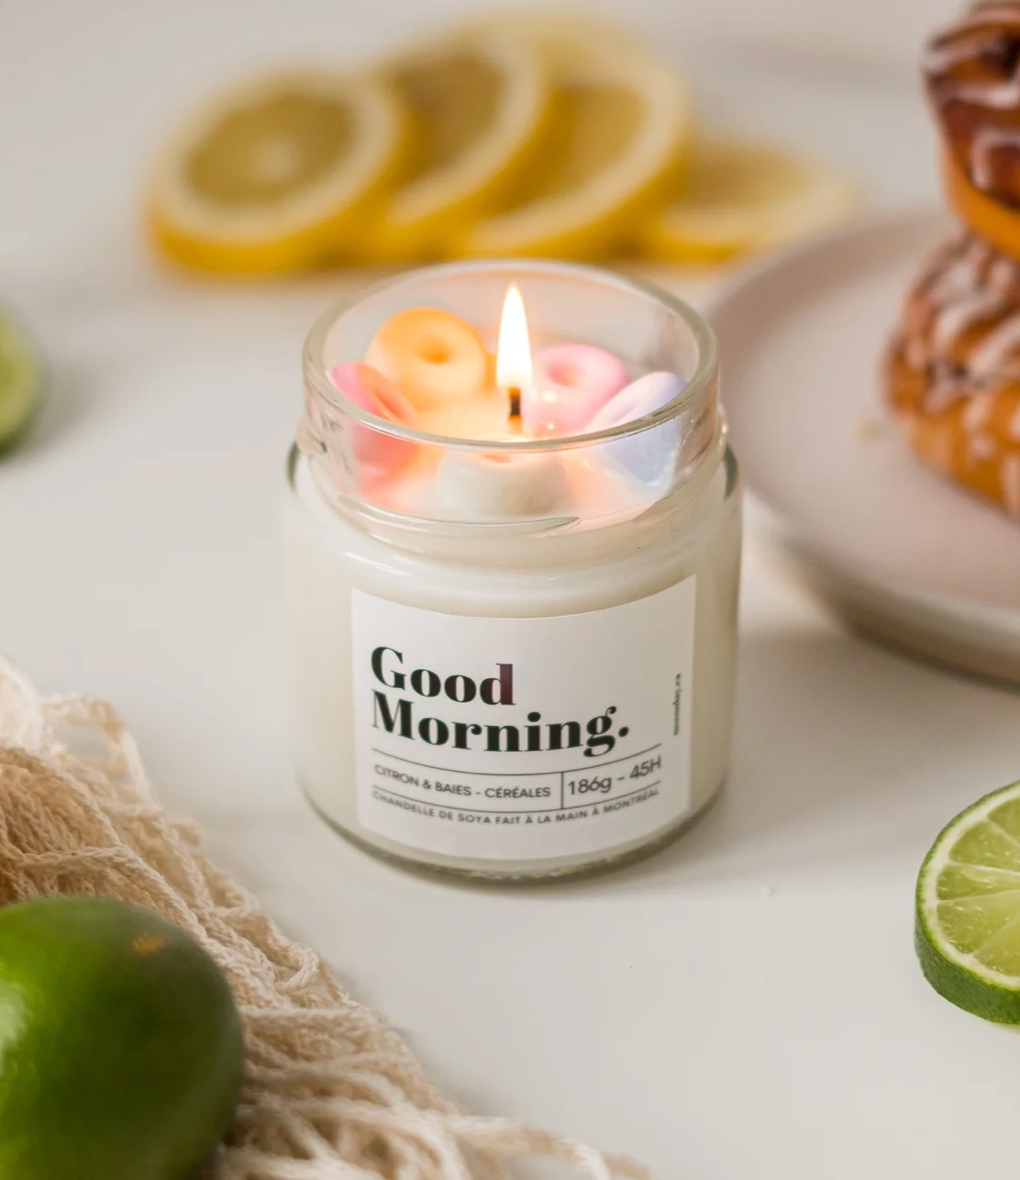 Moonday - Good Morning Candle